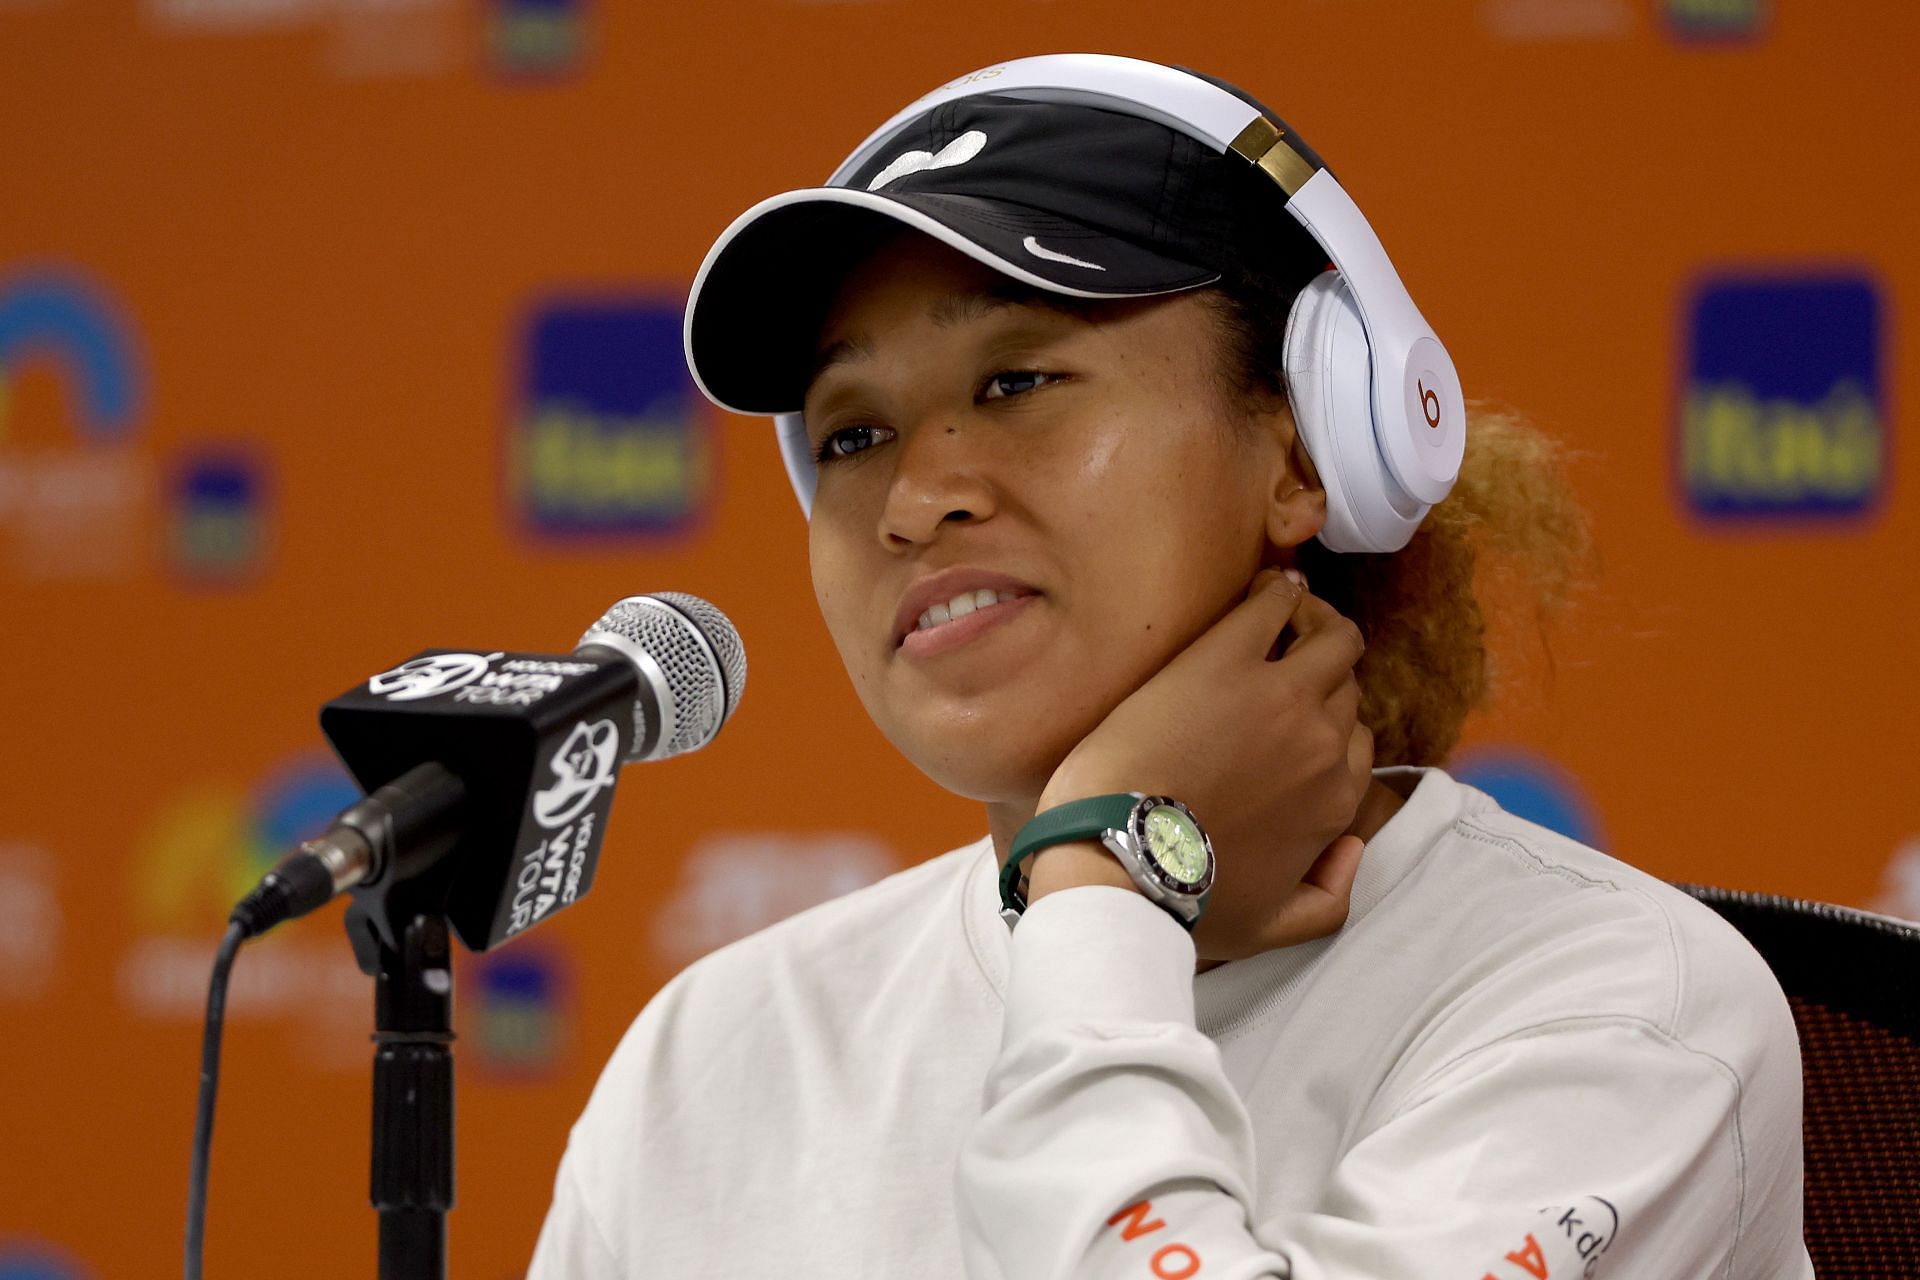 Naomi Osaka after her first-round win at the Miami Open on Wednesday